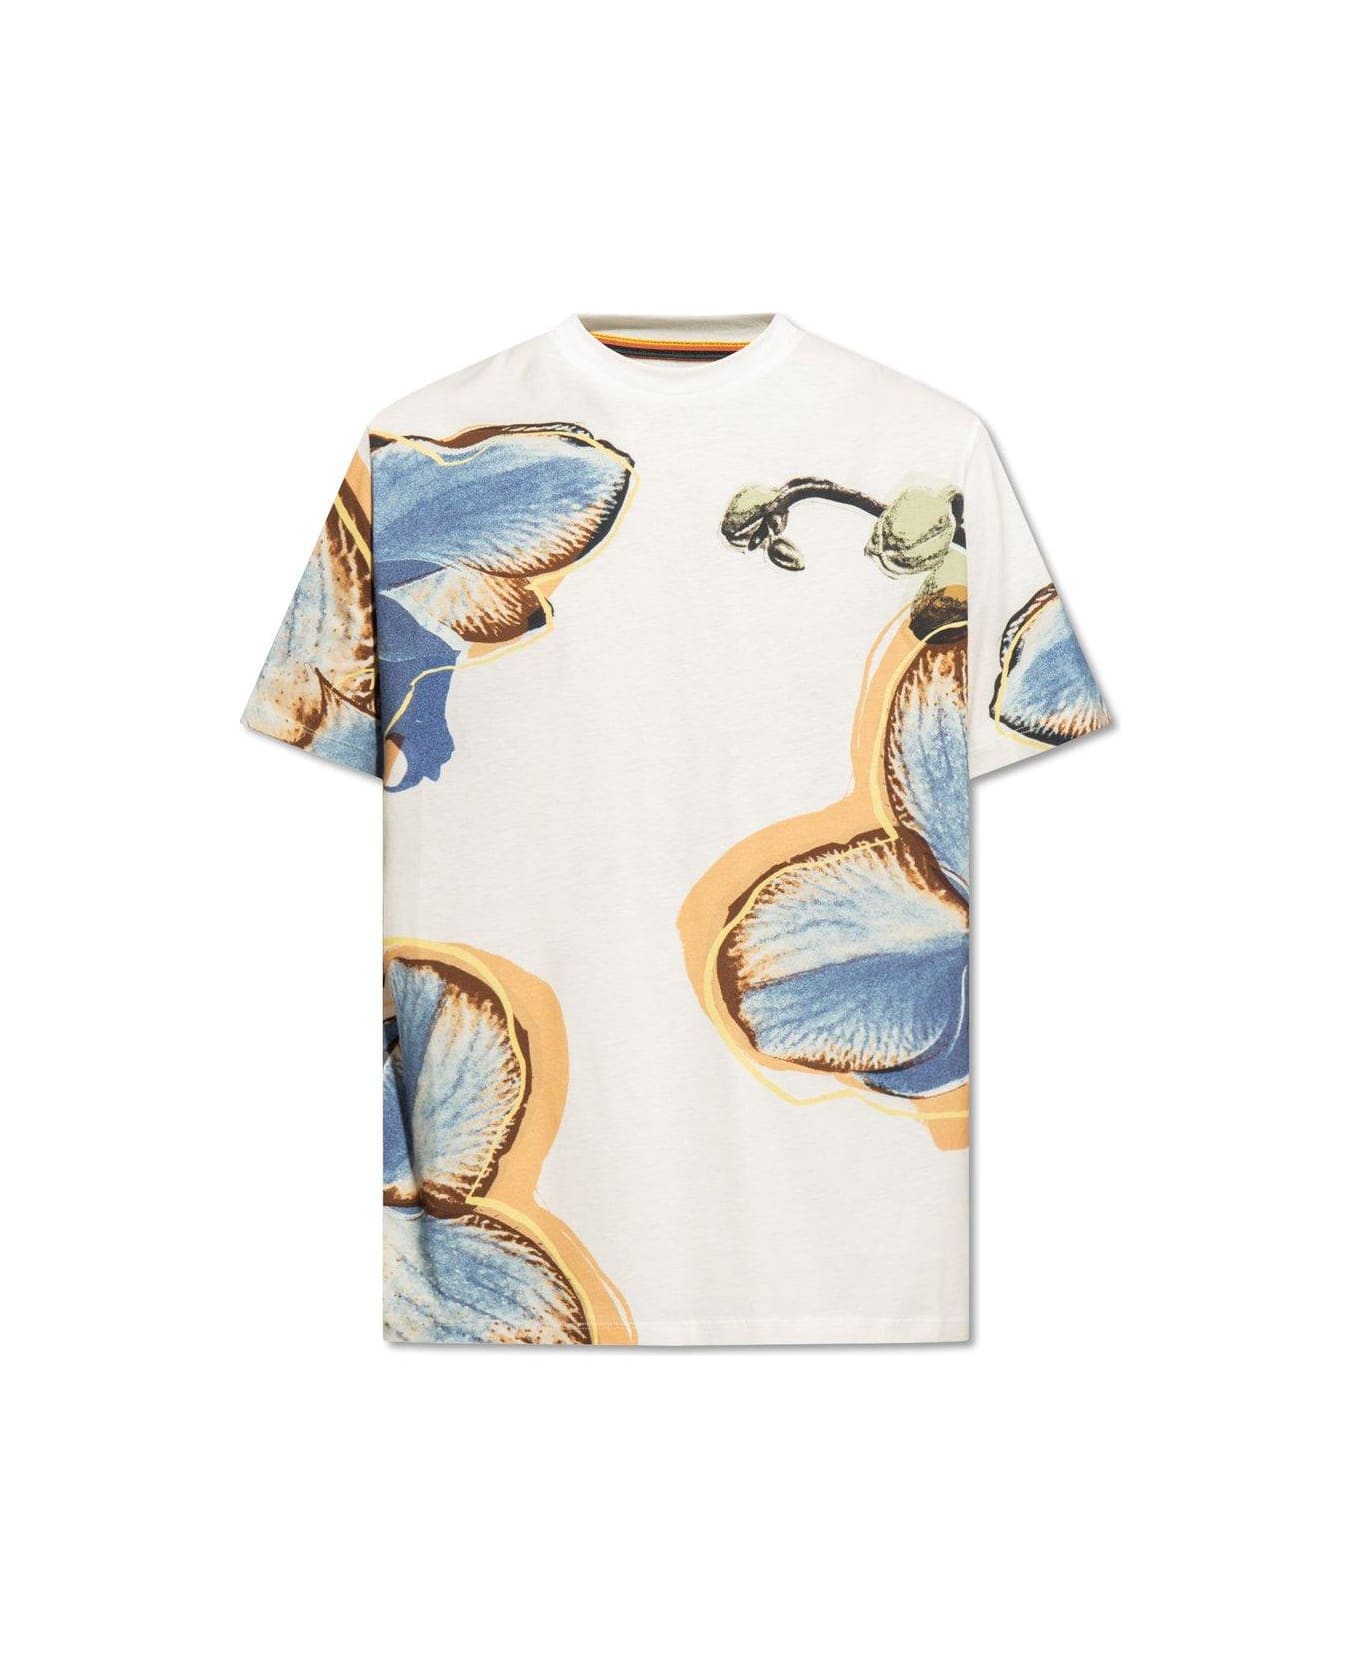 Paul Smith Printed T-shirt - Bianco multicolor